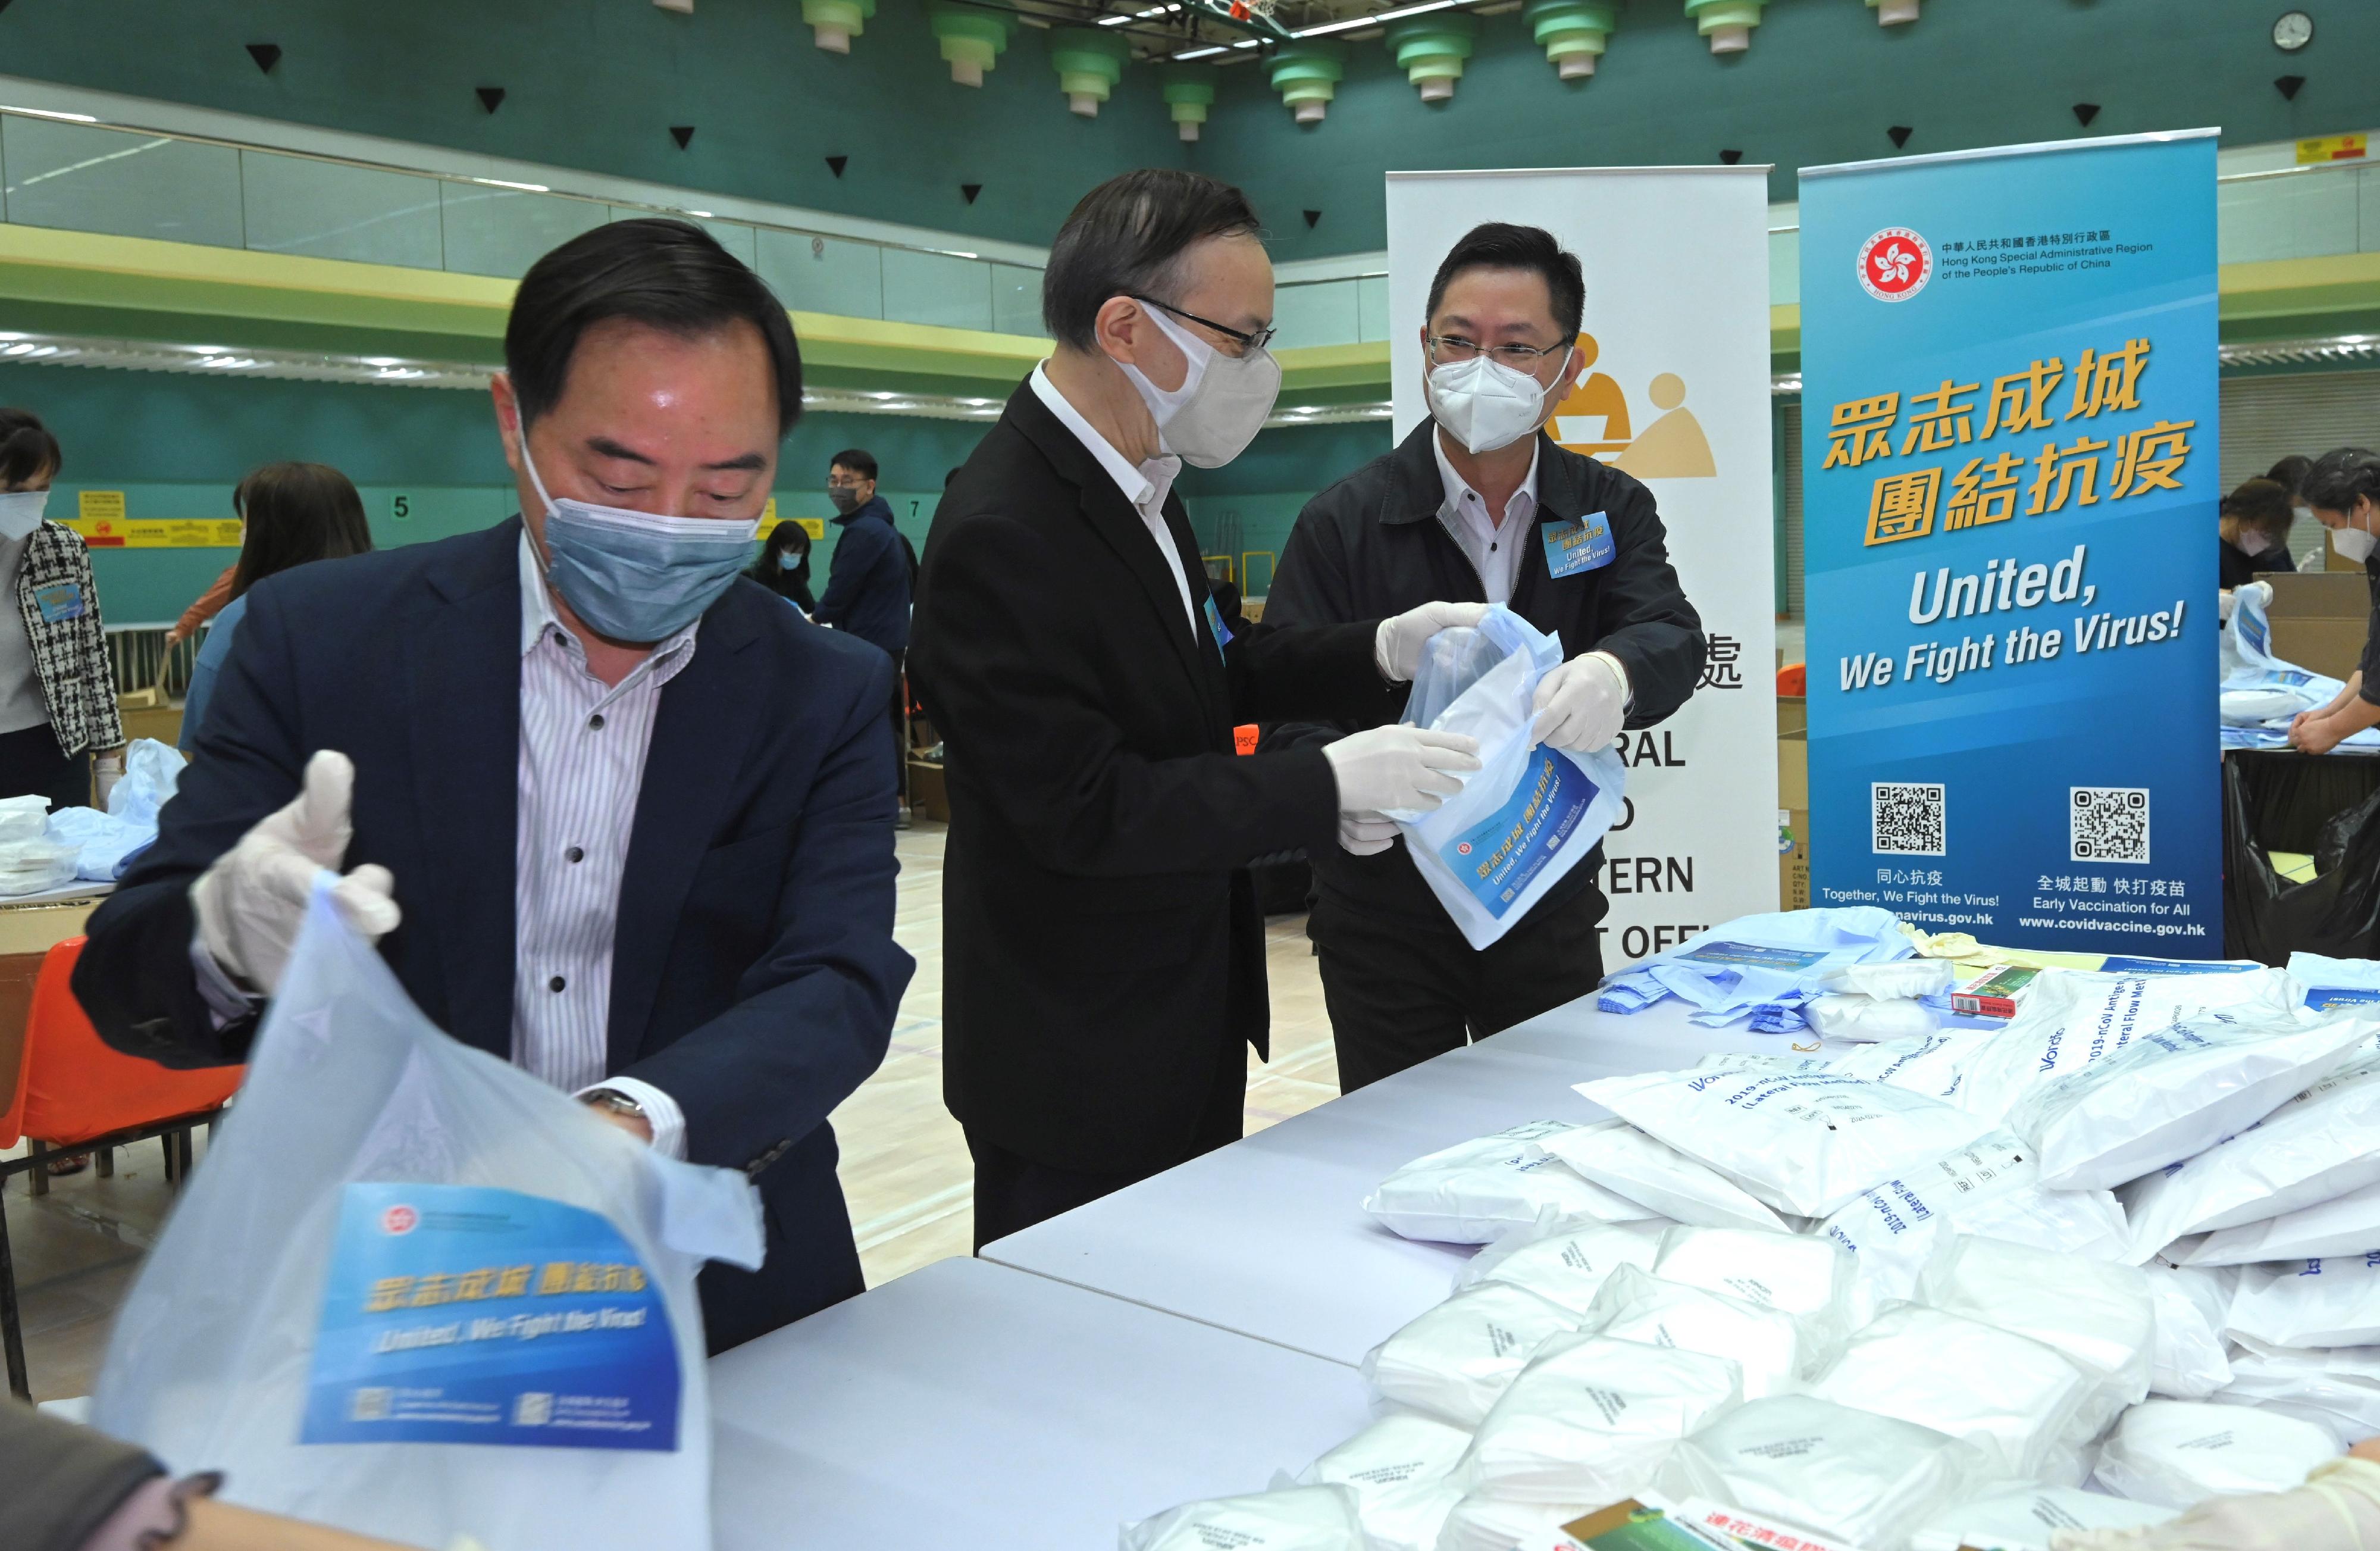 The Secretary for Innovation and Technology, Mr Alfred Sit (right); the Government Chief Information Officer, Mr Victor Lam (centre); and the Deputy Government Chief Information Officer, Mr Tony Wong (left), engage in the packaging work of anti-epidemic service bags at the Hong Kong Park Sports Centre today (March 31). 